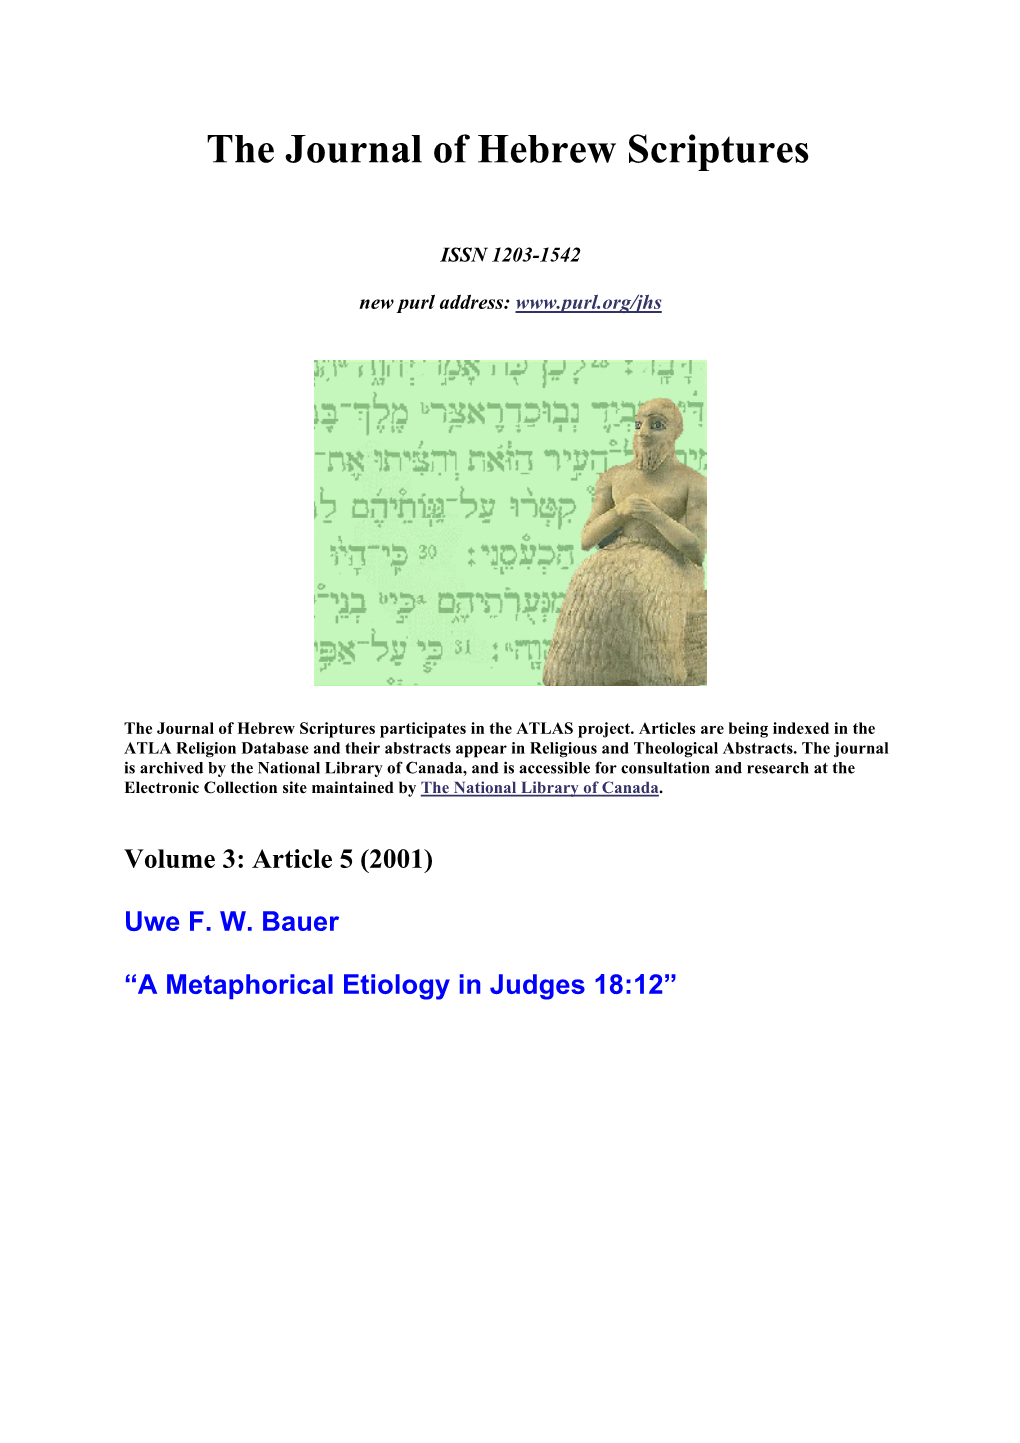 A Metaphorical Etiology in Judges 18:12”